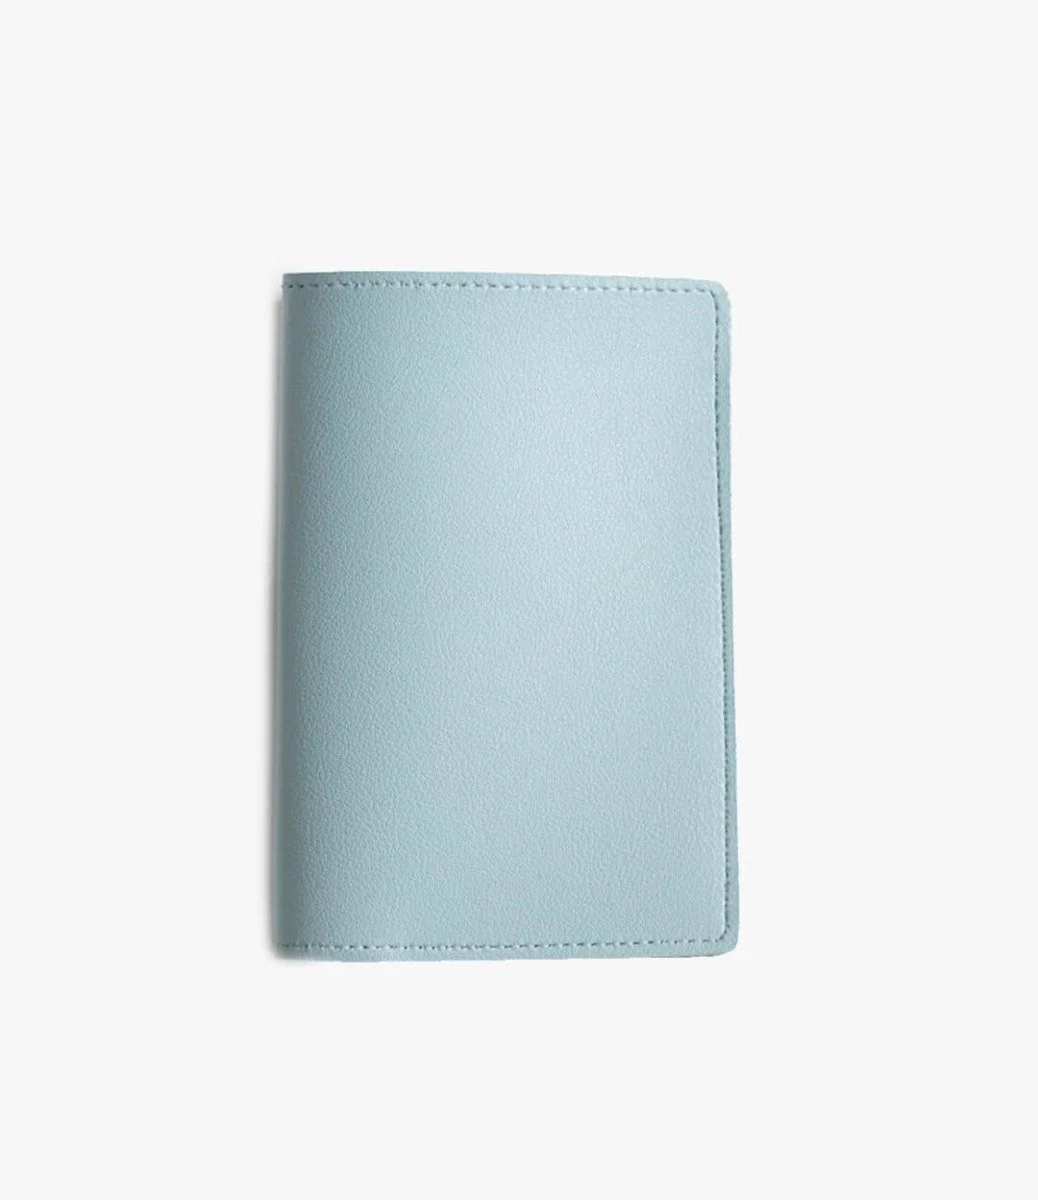 Vegan Leather Passport Cover - Dark Blue by Royal Page Co